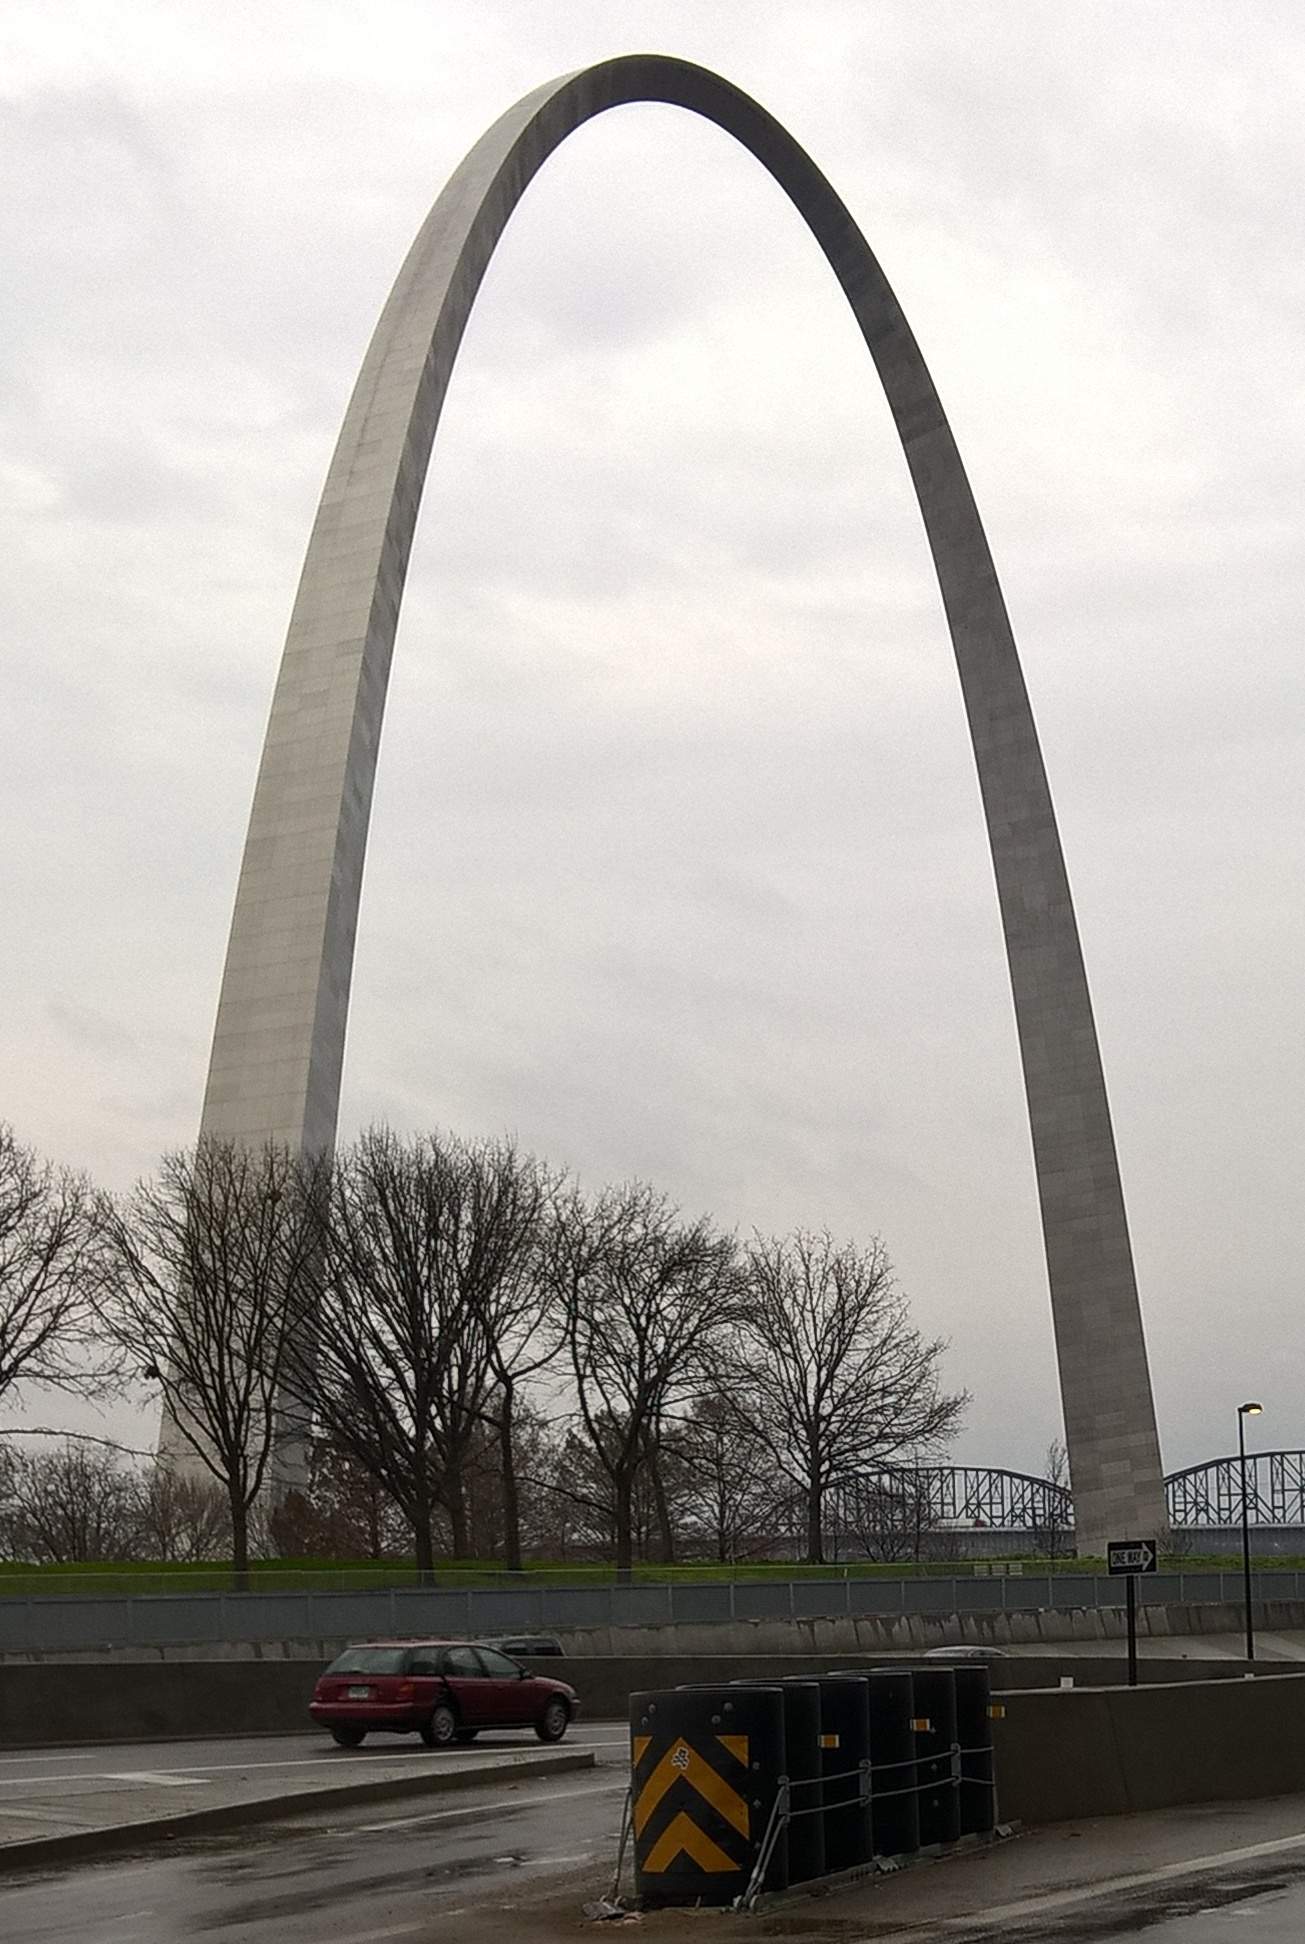 St. Louis Running Tour, Self-Guided